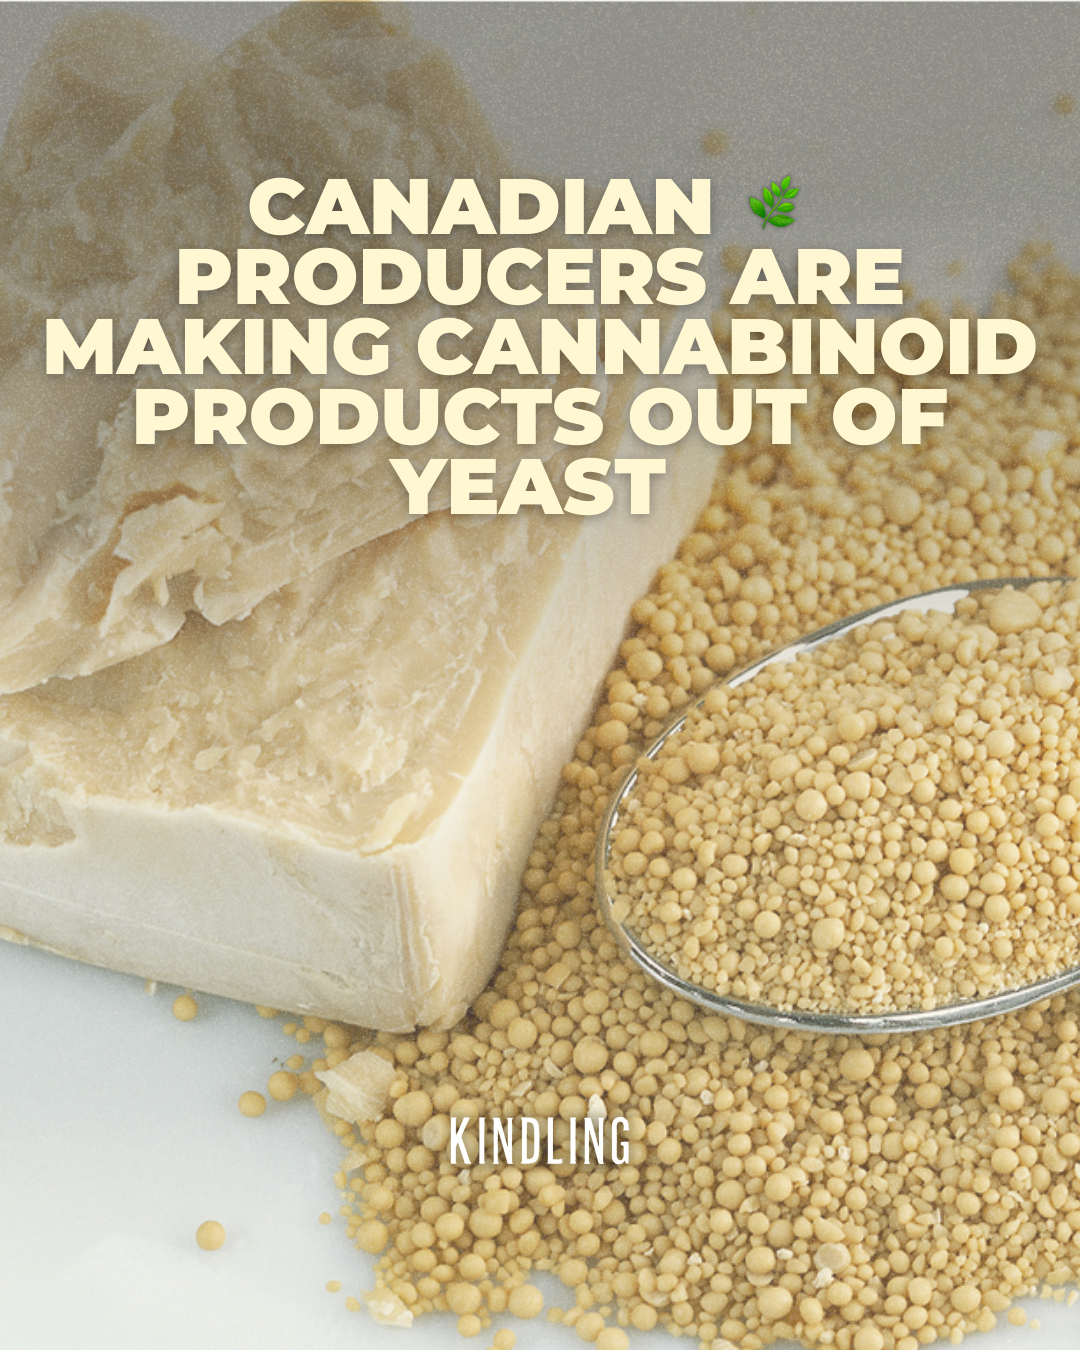 Canadian Cannabis Producers Are Making Cannabinoid Products Out Of Yeast